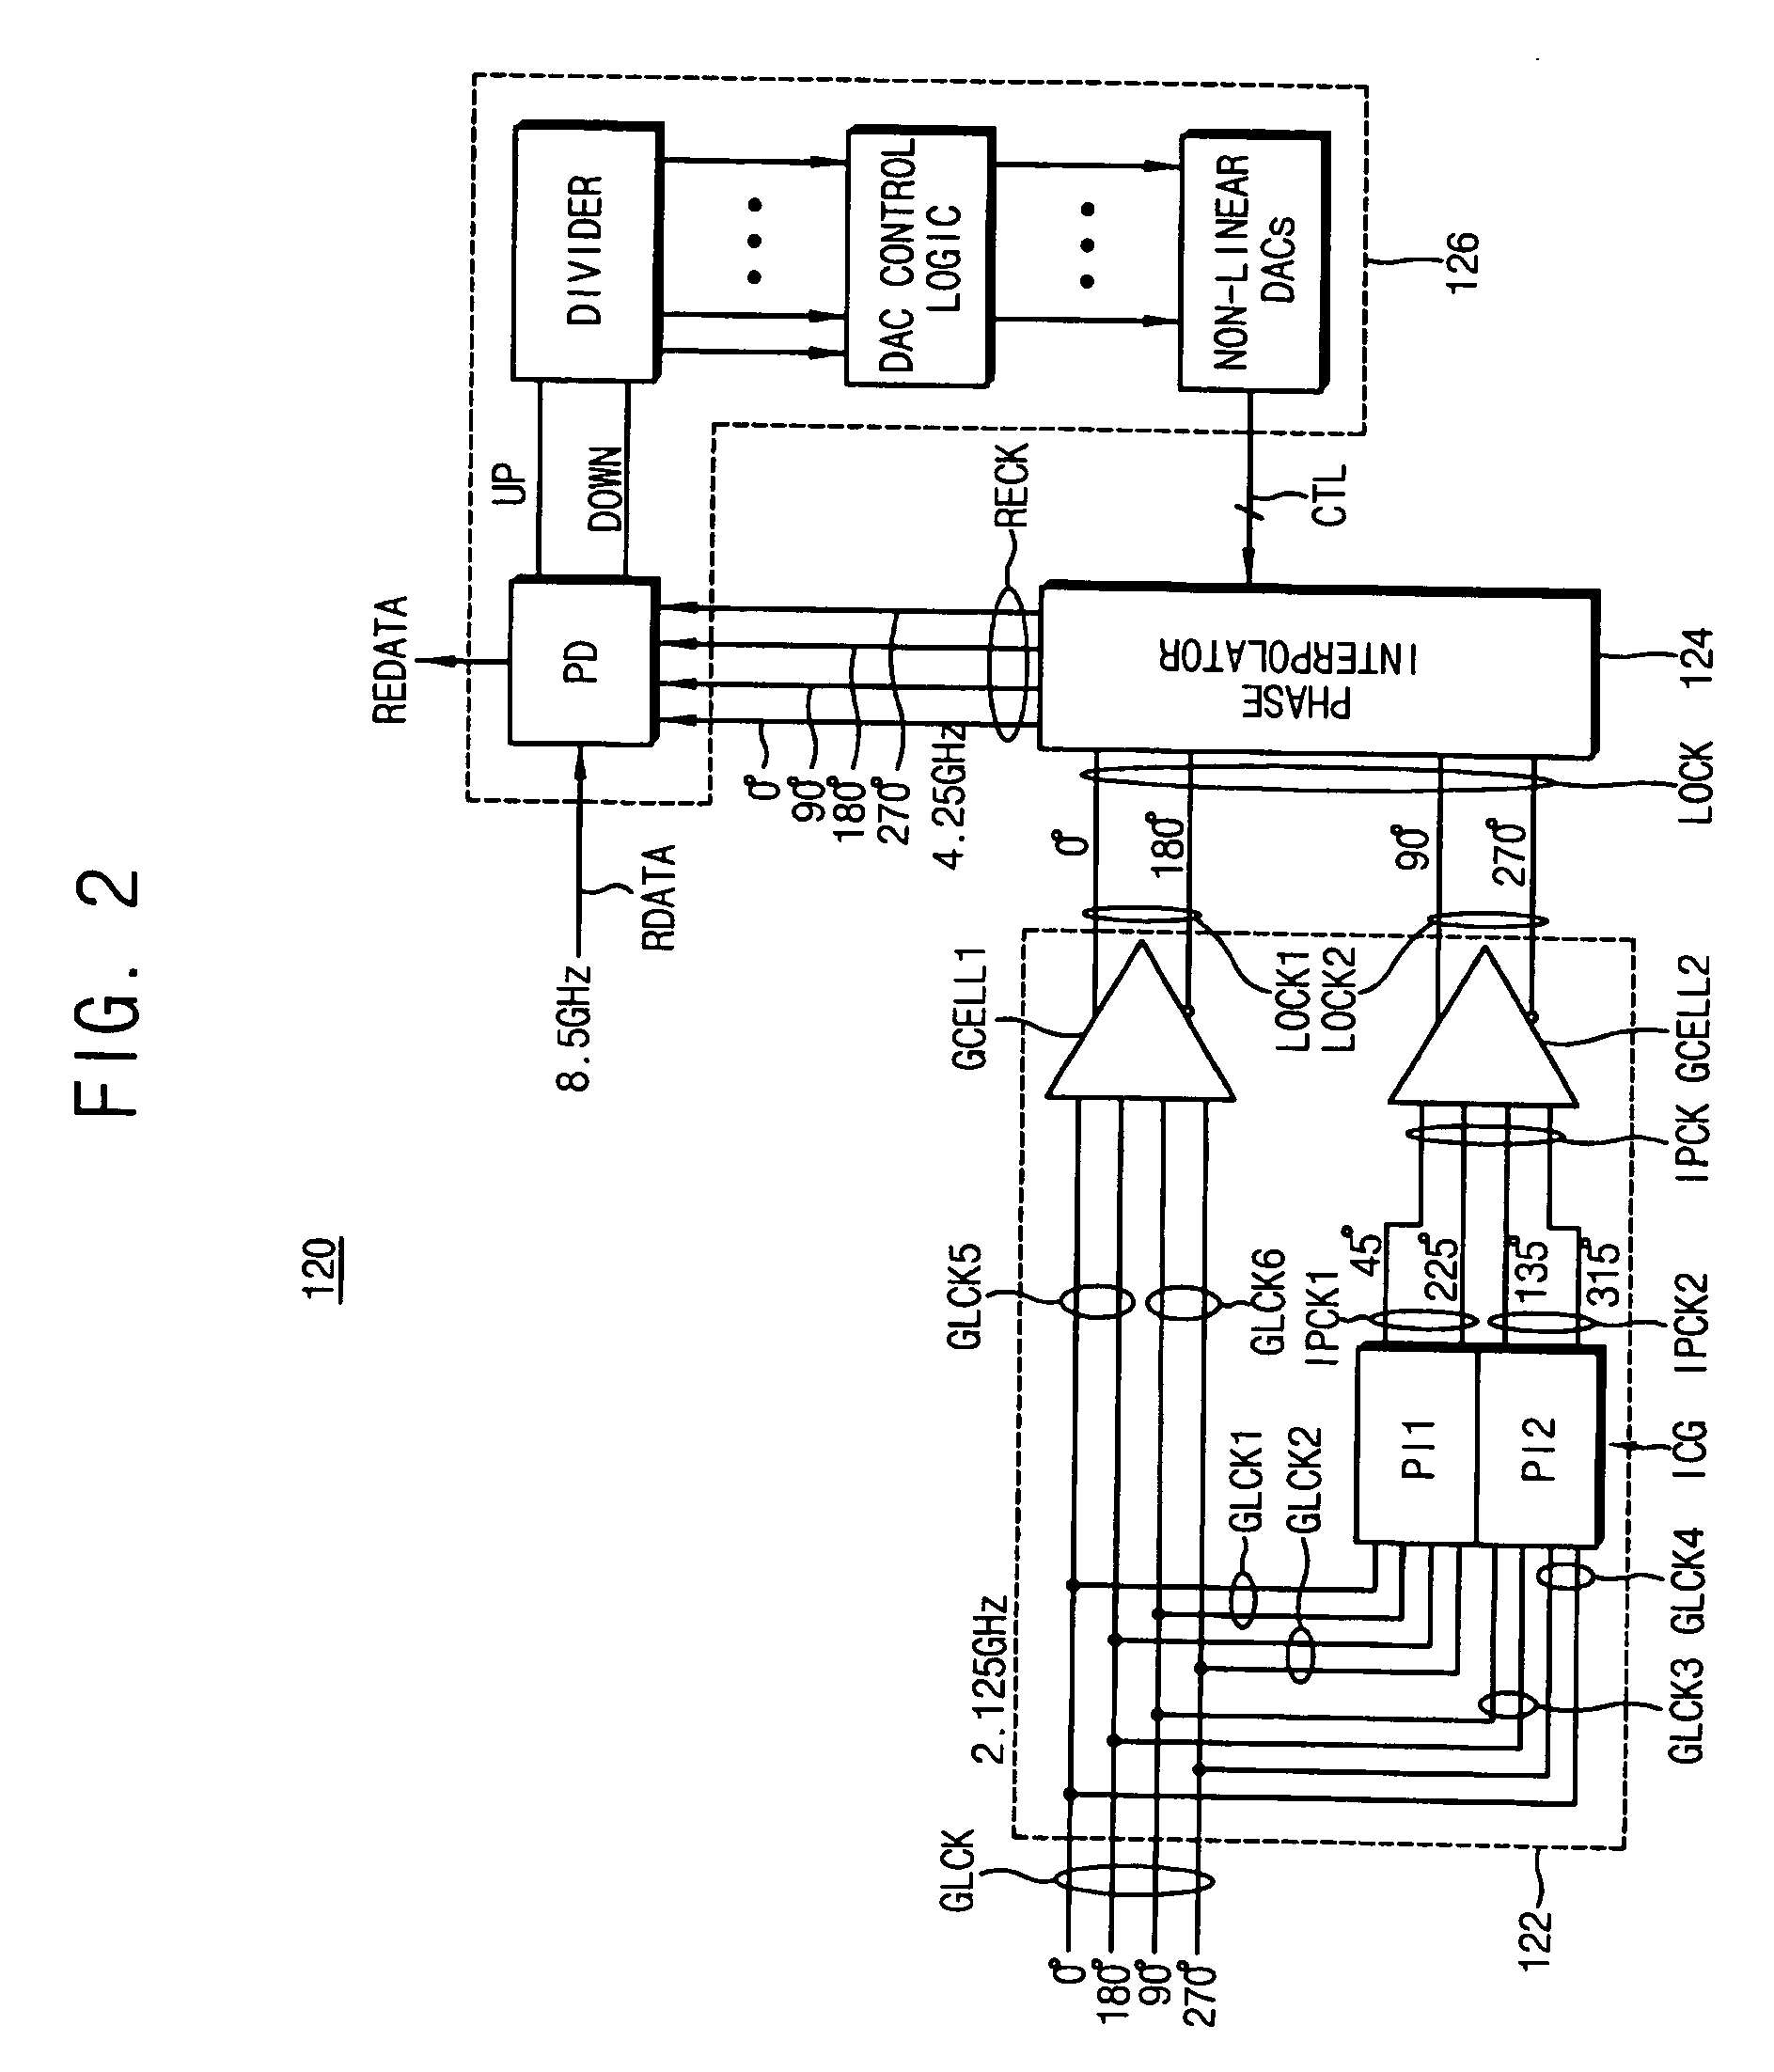 Circuits and methods for recovering a clock signal